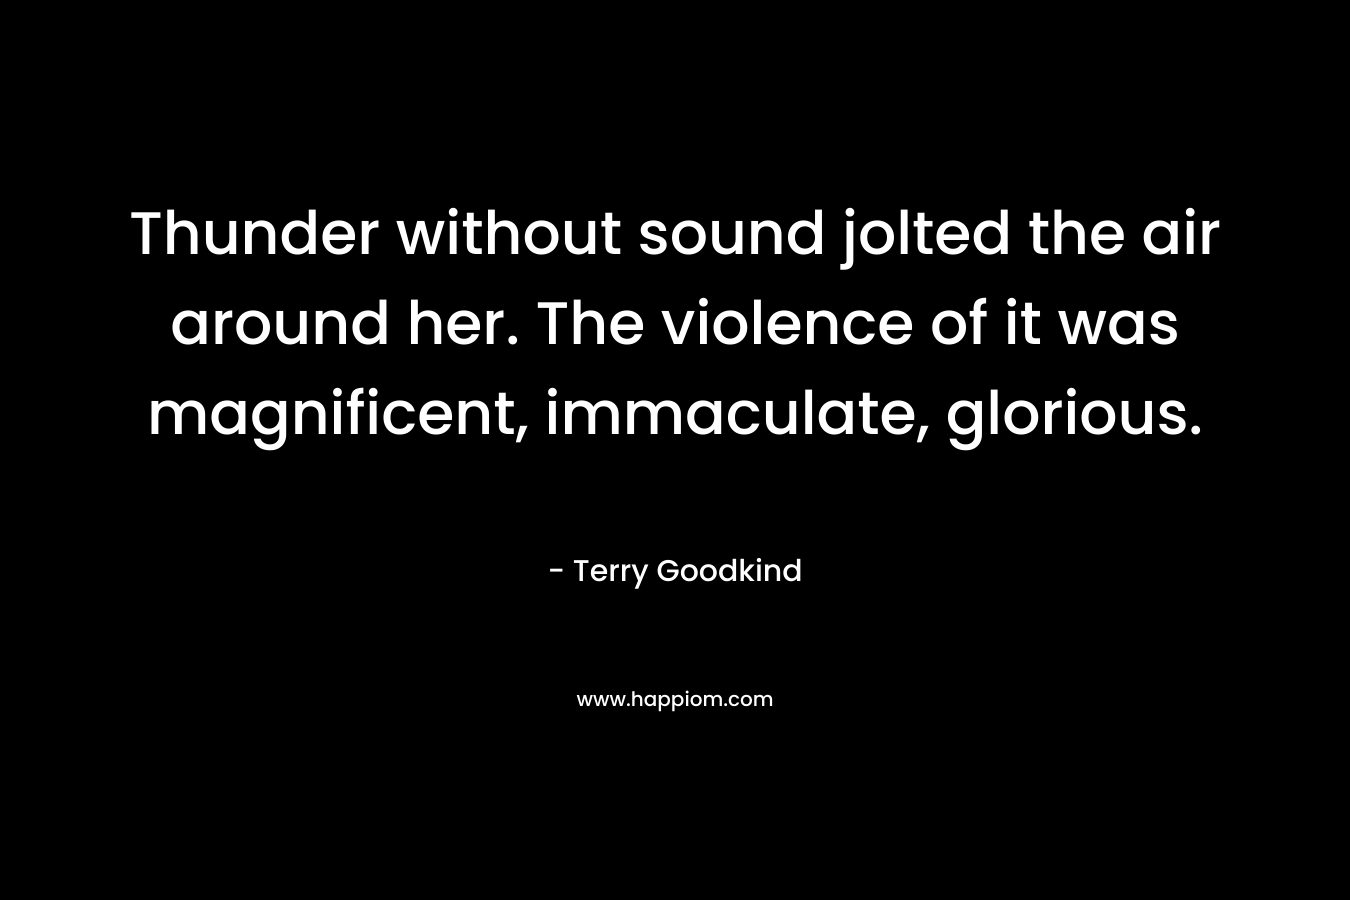 Thunder without sound jolted the air around her. The violence of it was magnificent, immaculate, glorious. – Terry Goodkind